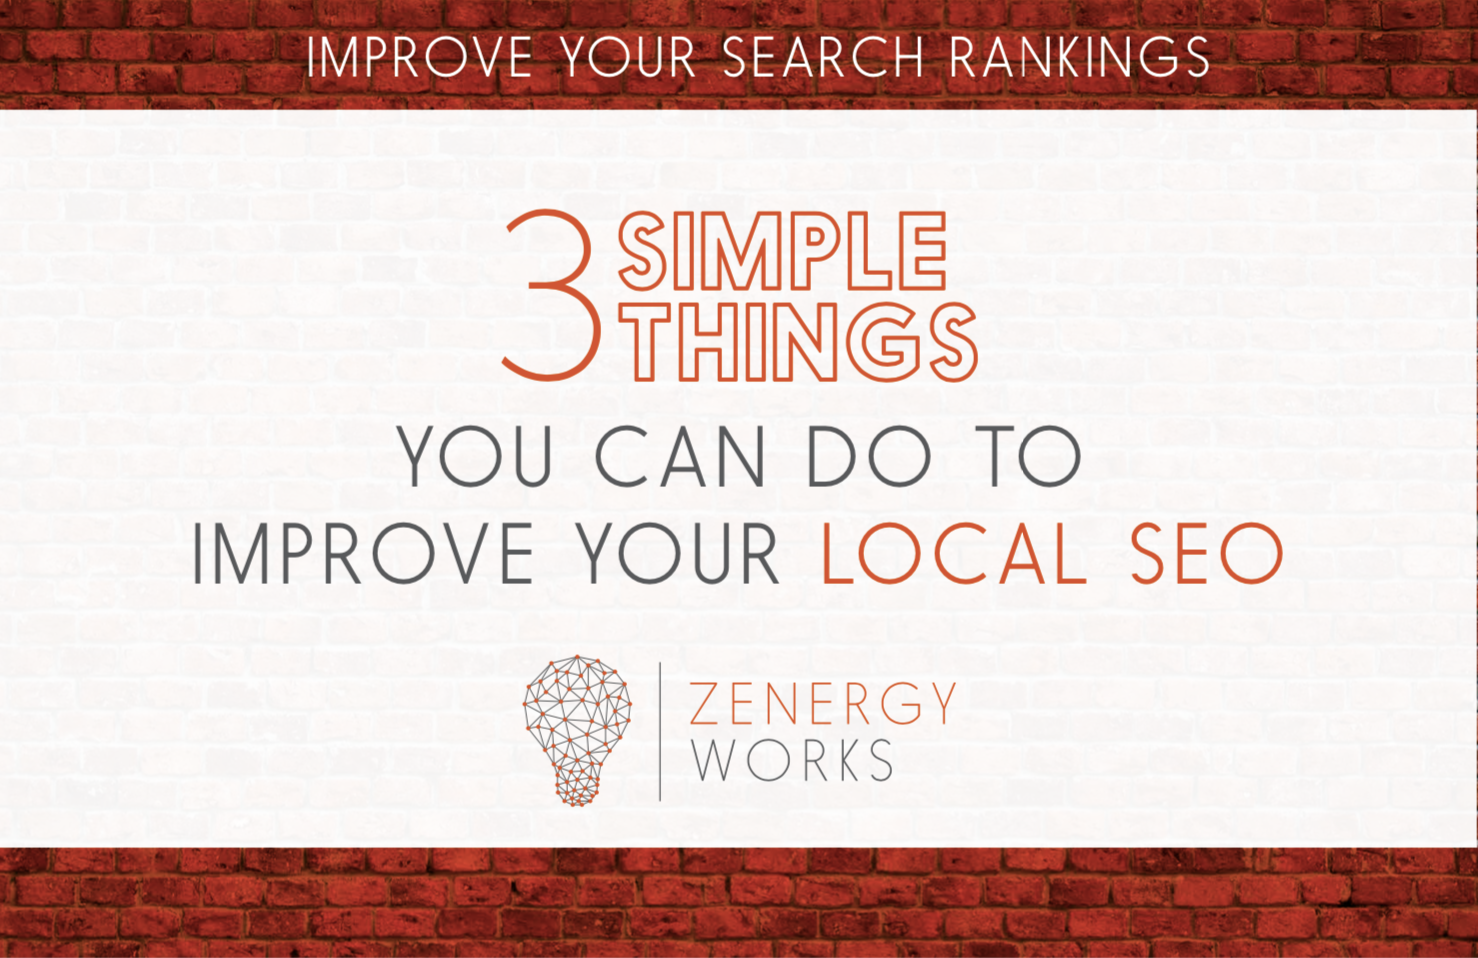 3 Simple Things You Can Do to Improve Your Local SEO